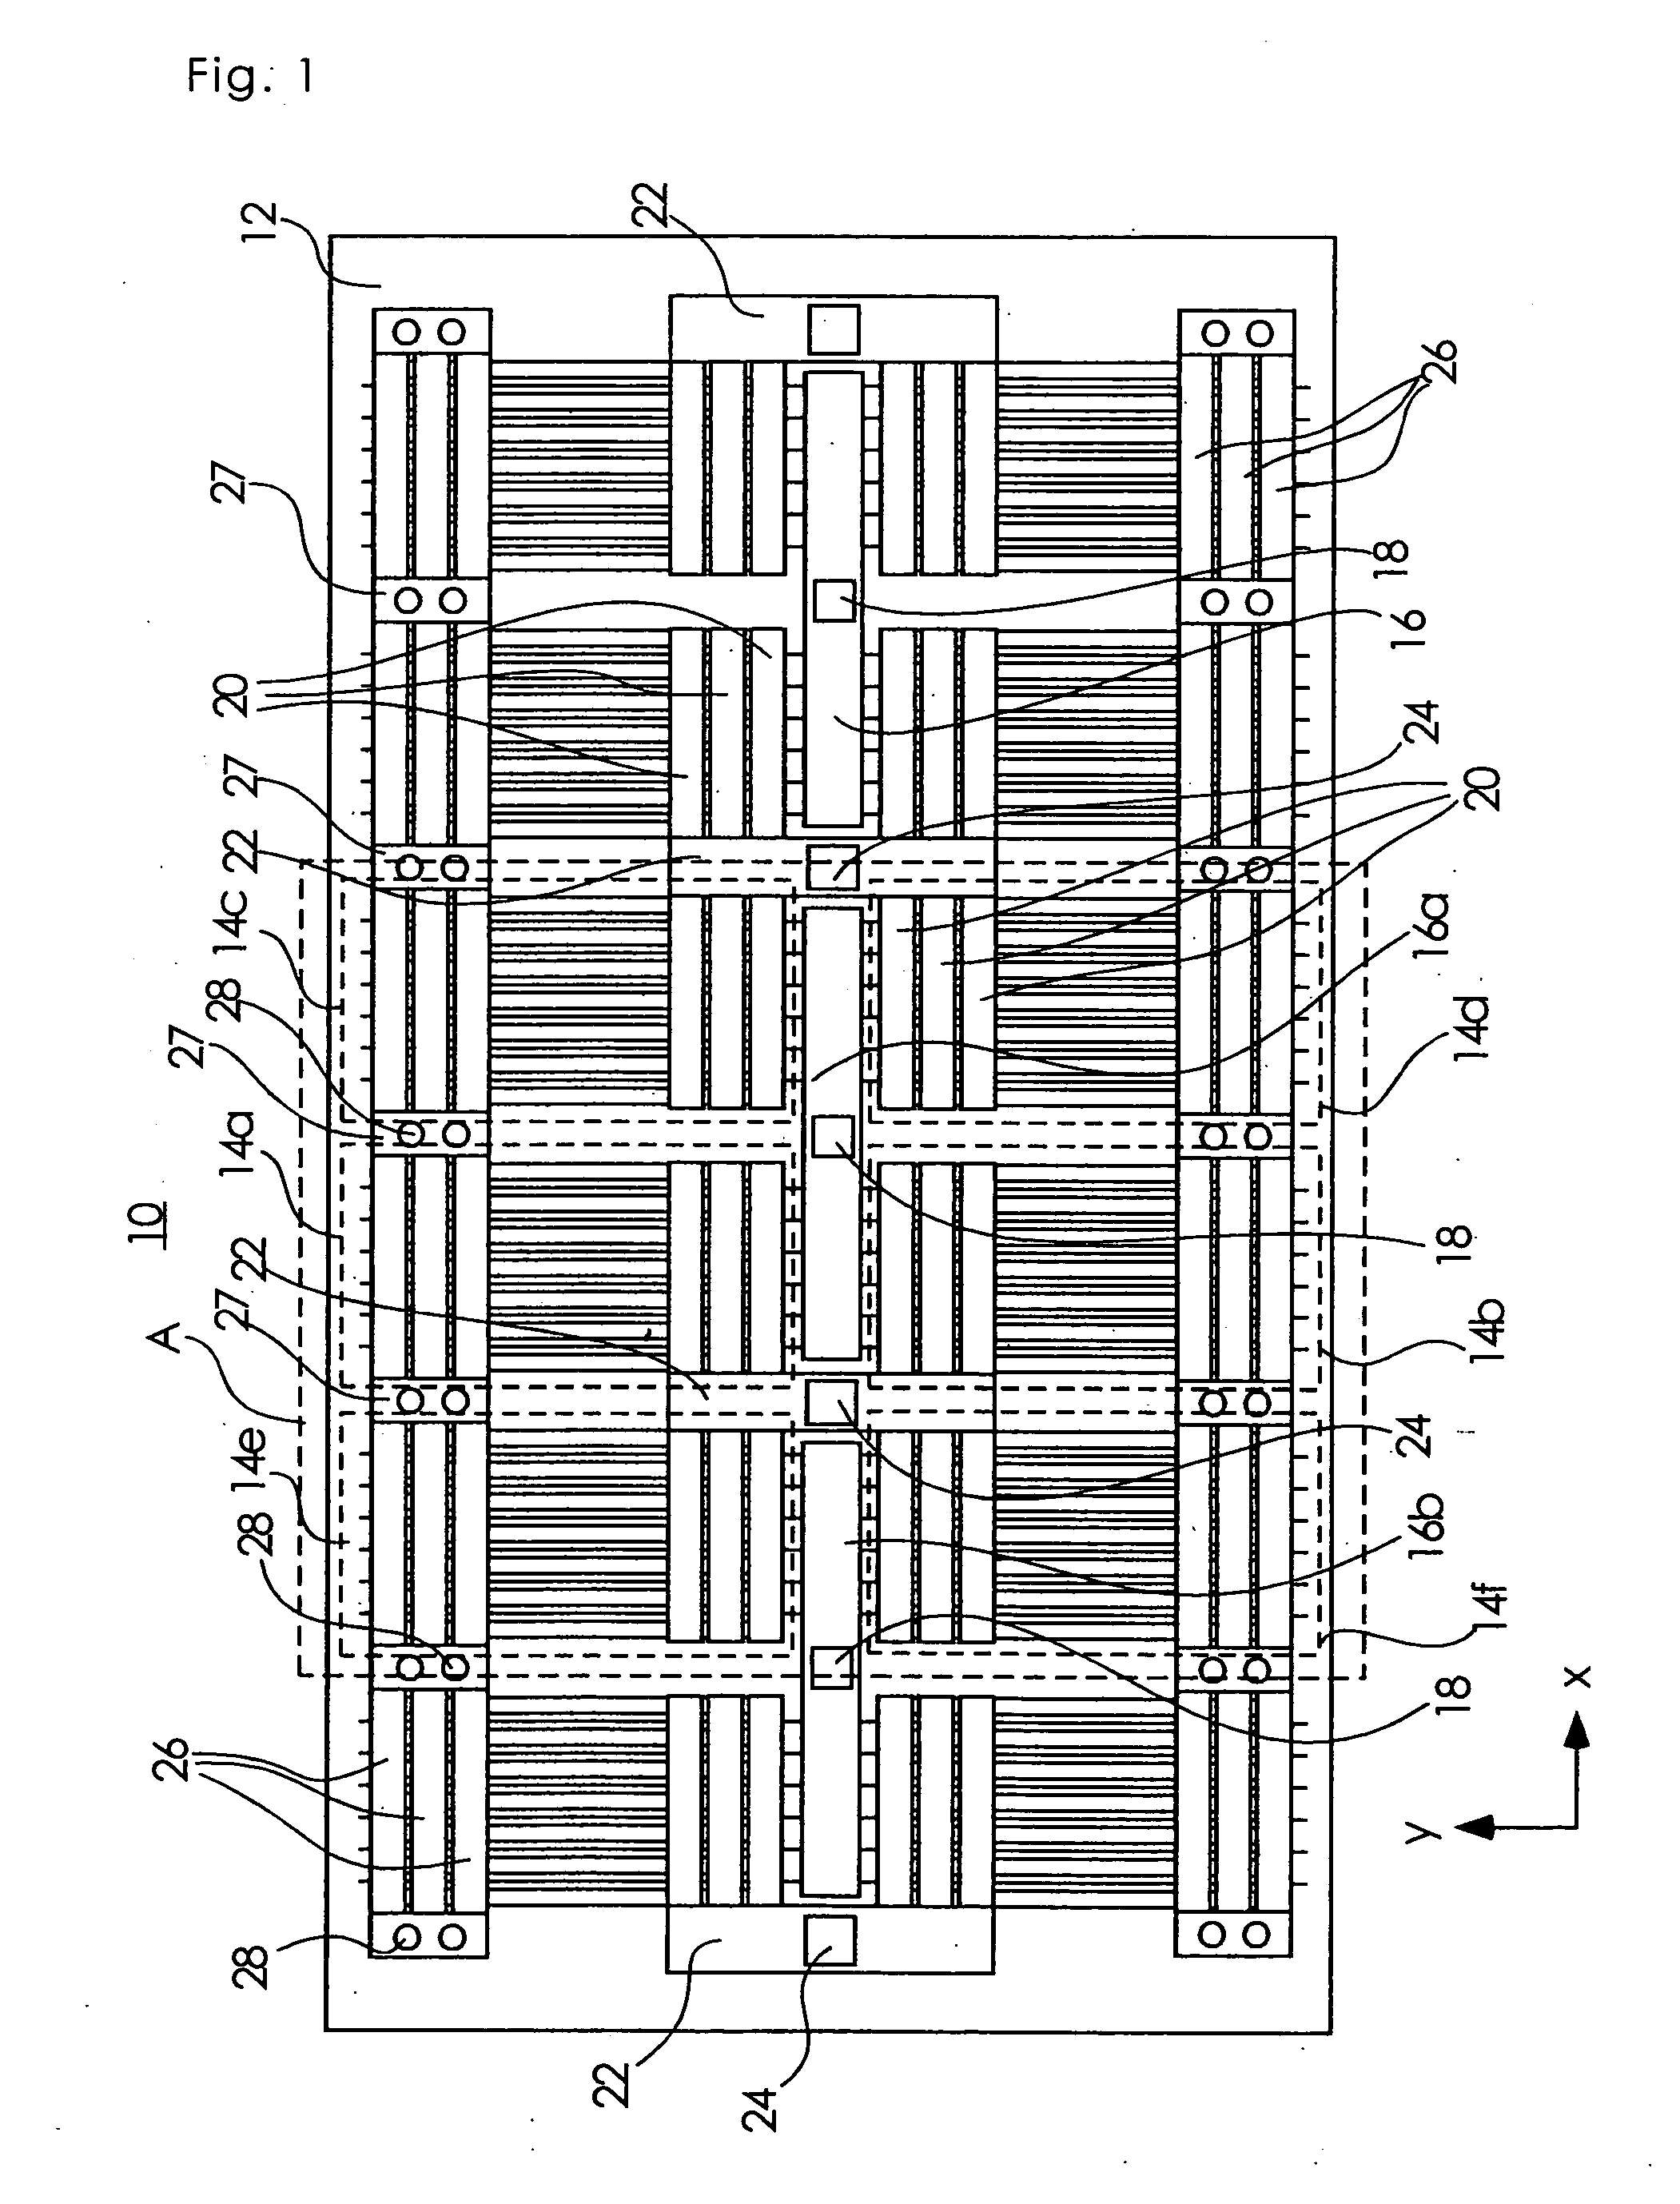 High-frequency semiconductor device